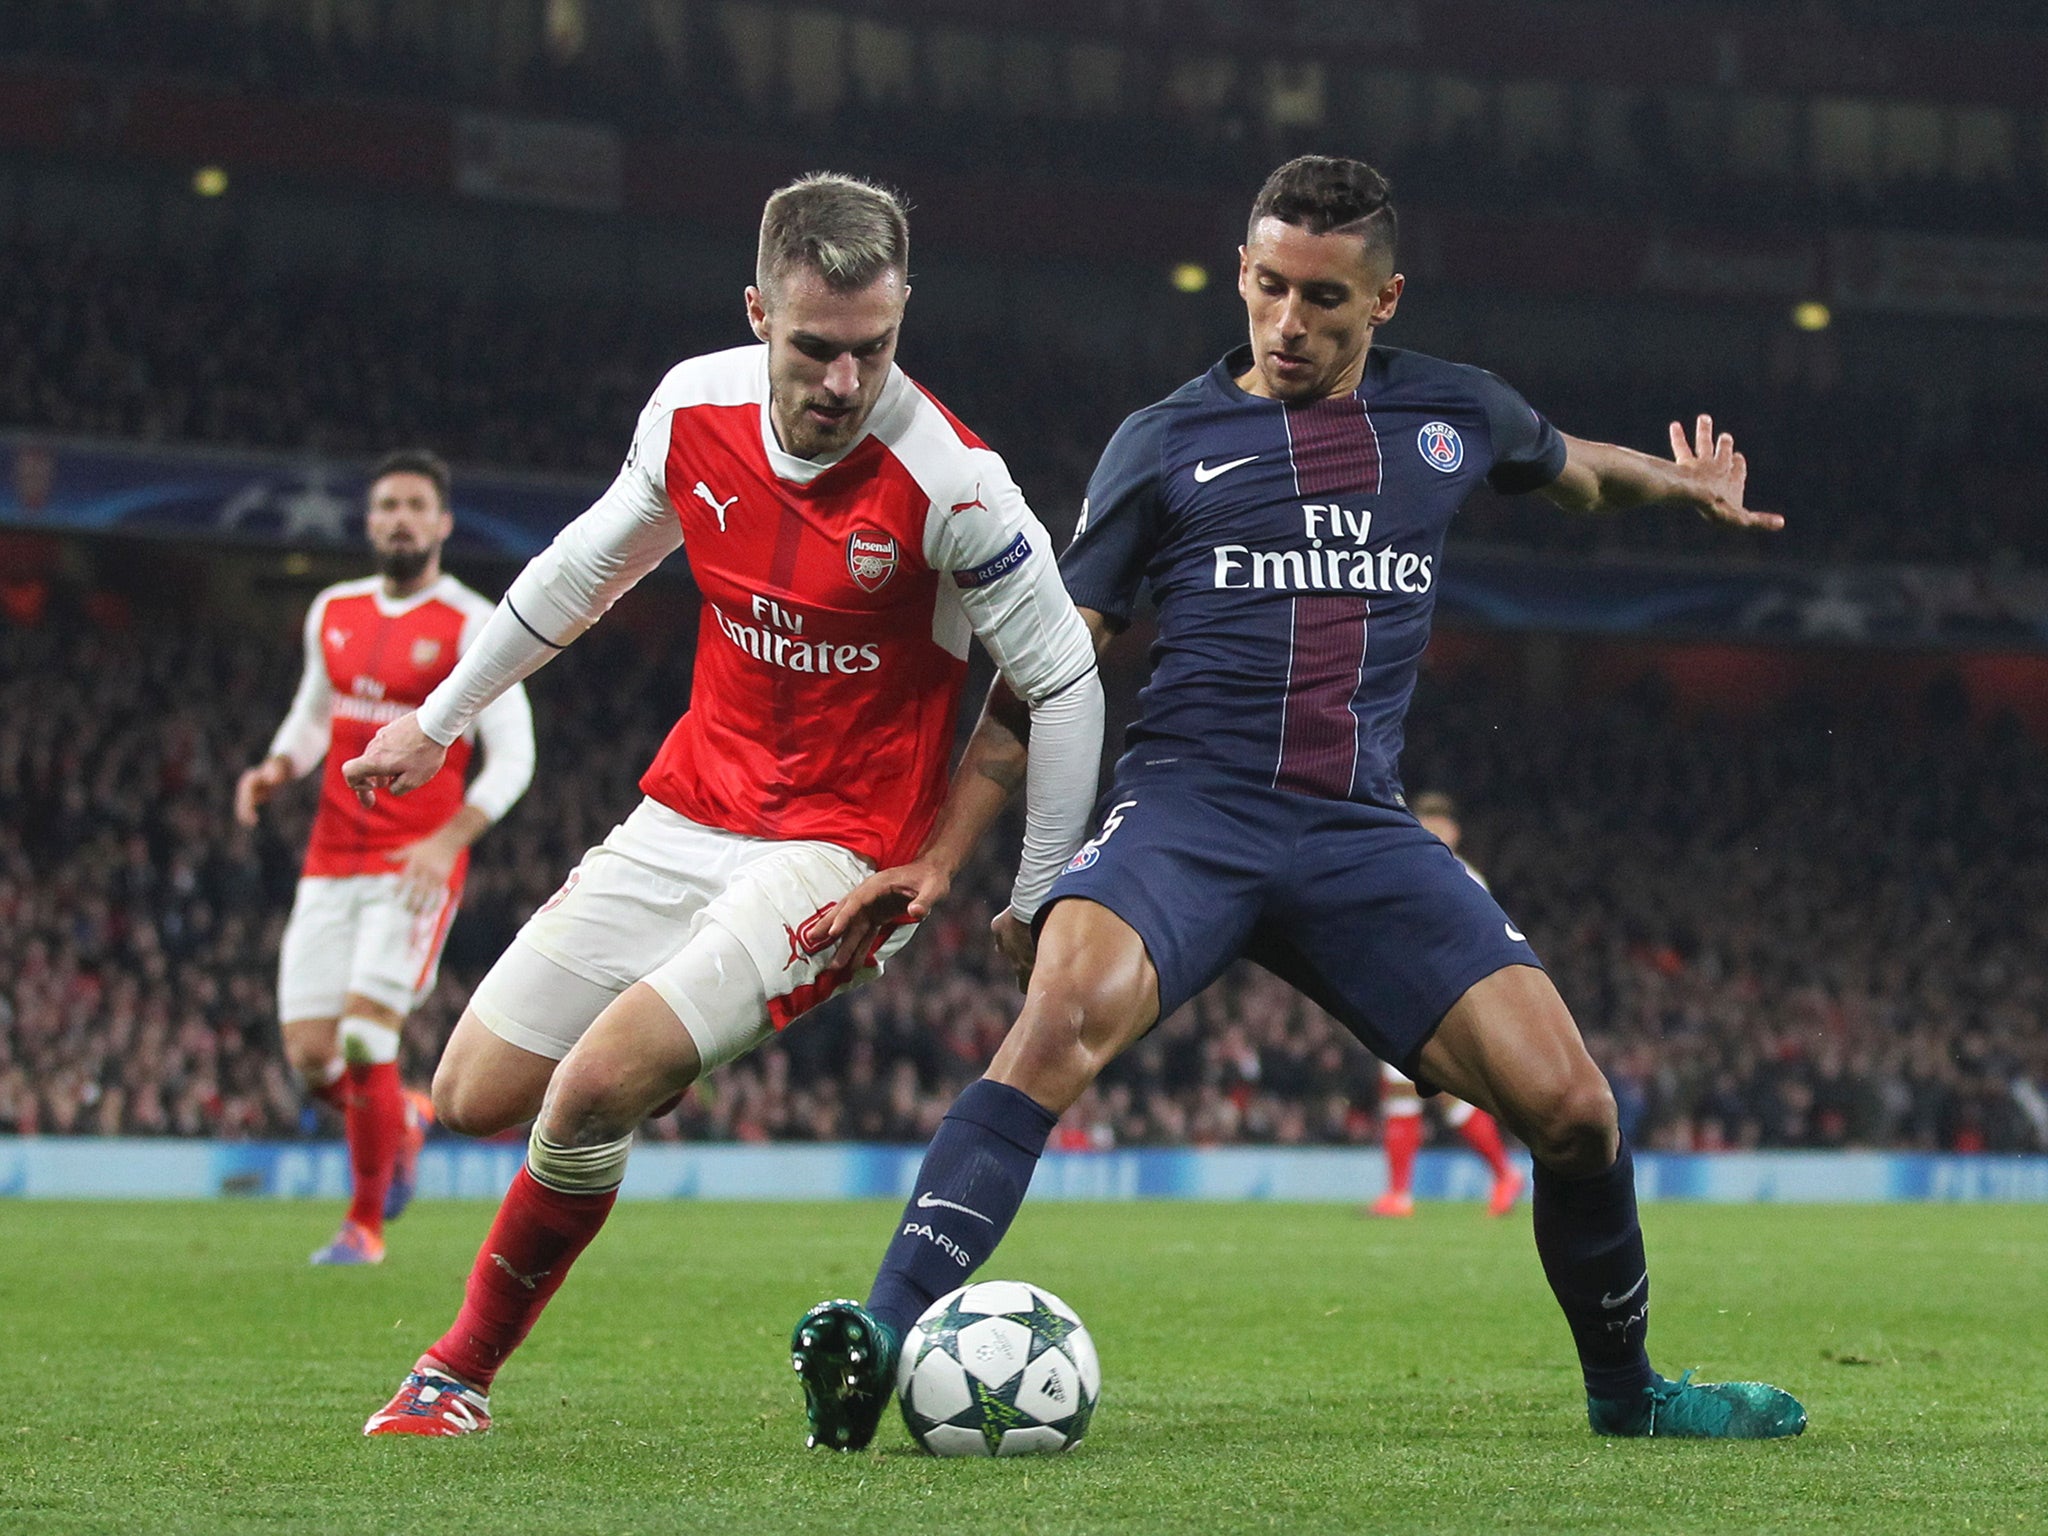 Ramsey showed that he can offer variance to Arsenal's midfield